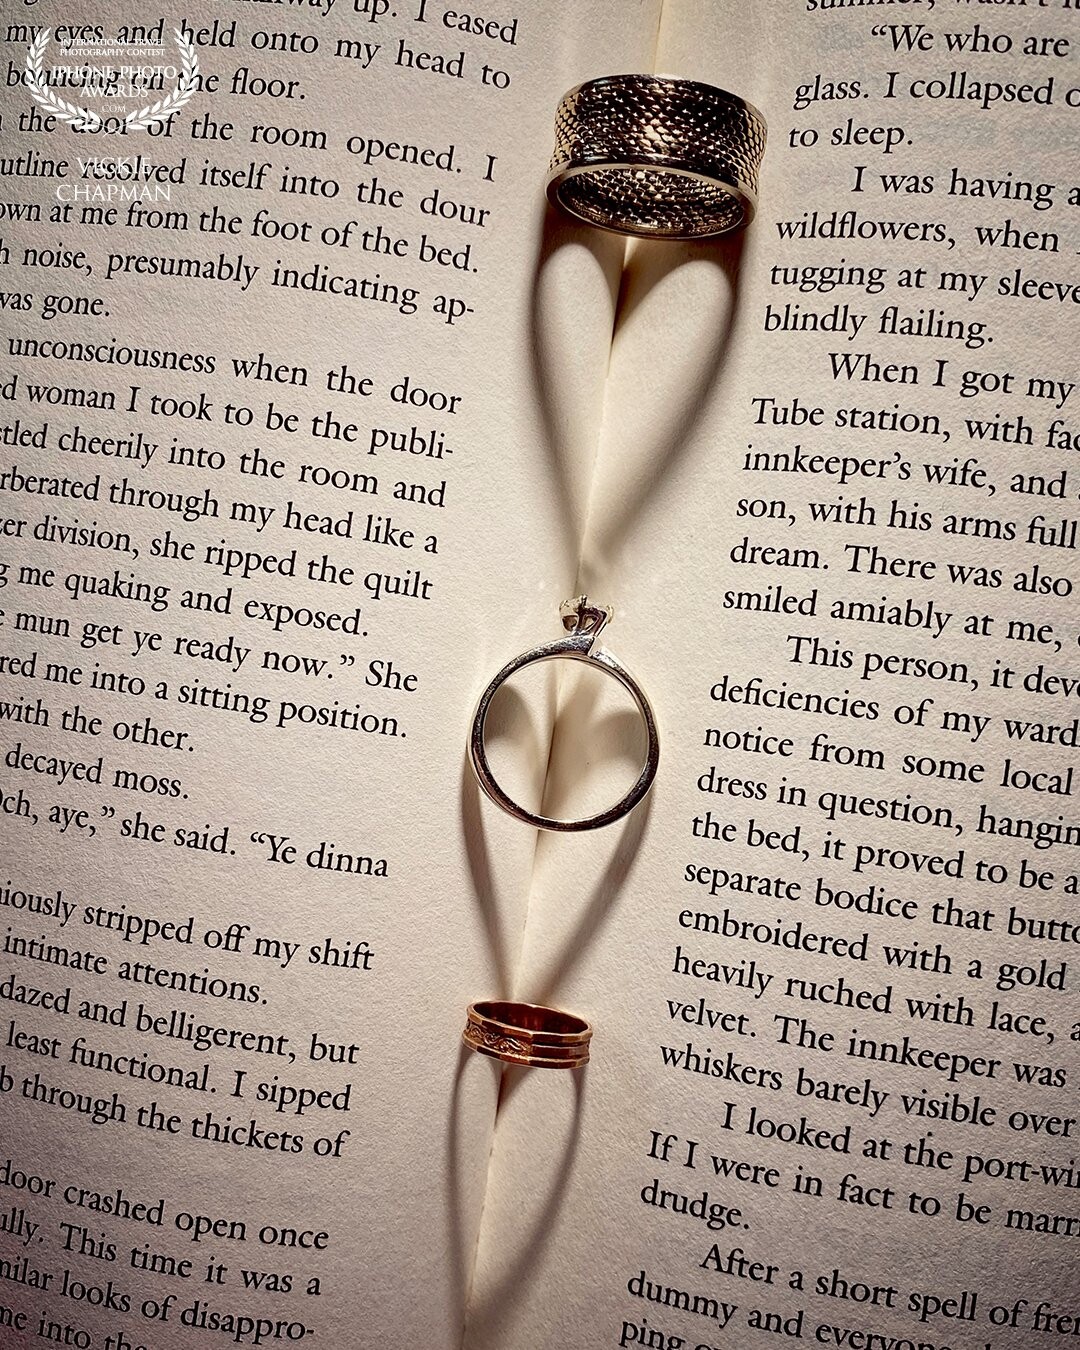 This is a variation on the traditional ring shot showing beautiful heart shadows. I have added a small babies ring to complete a family portrait of sorts.